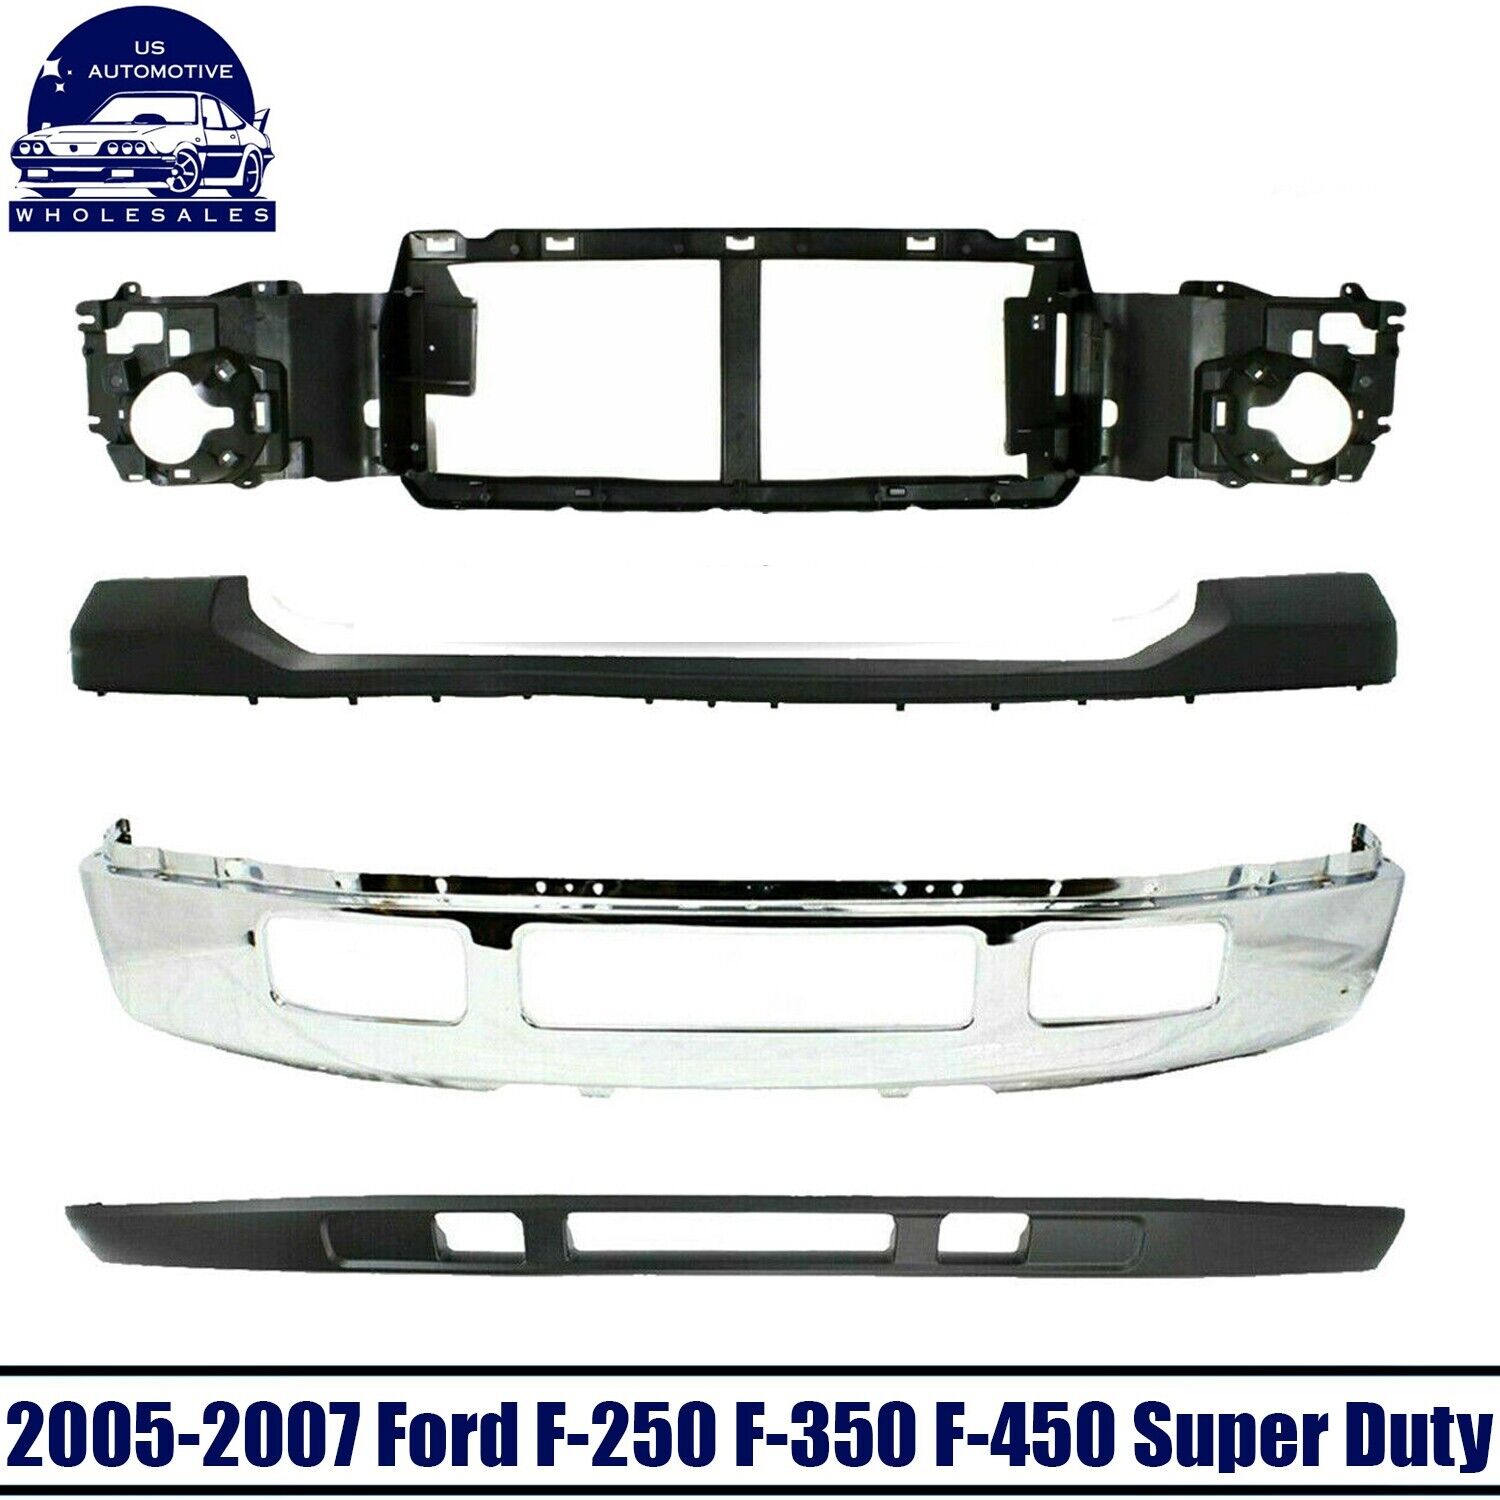 New Front Header Panel + Bumper Kit For 2005-2007 Ford F-250 F-350 Super Duty